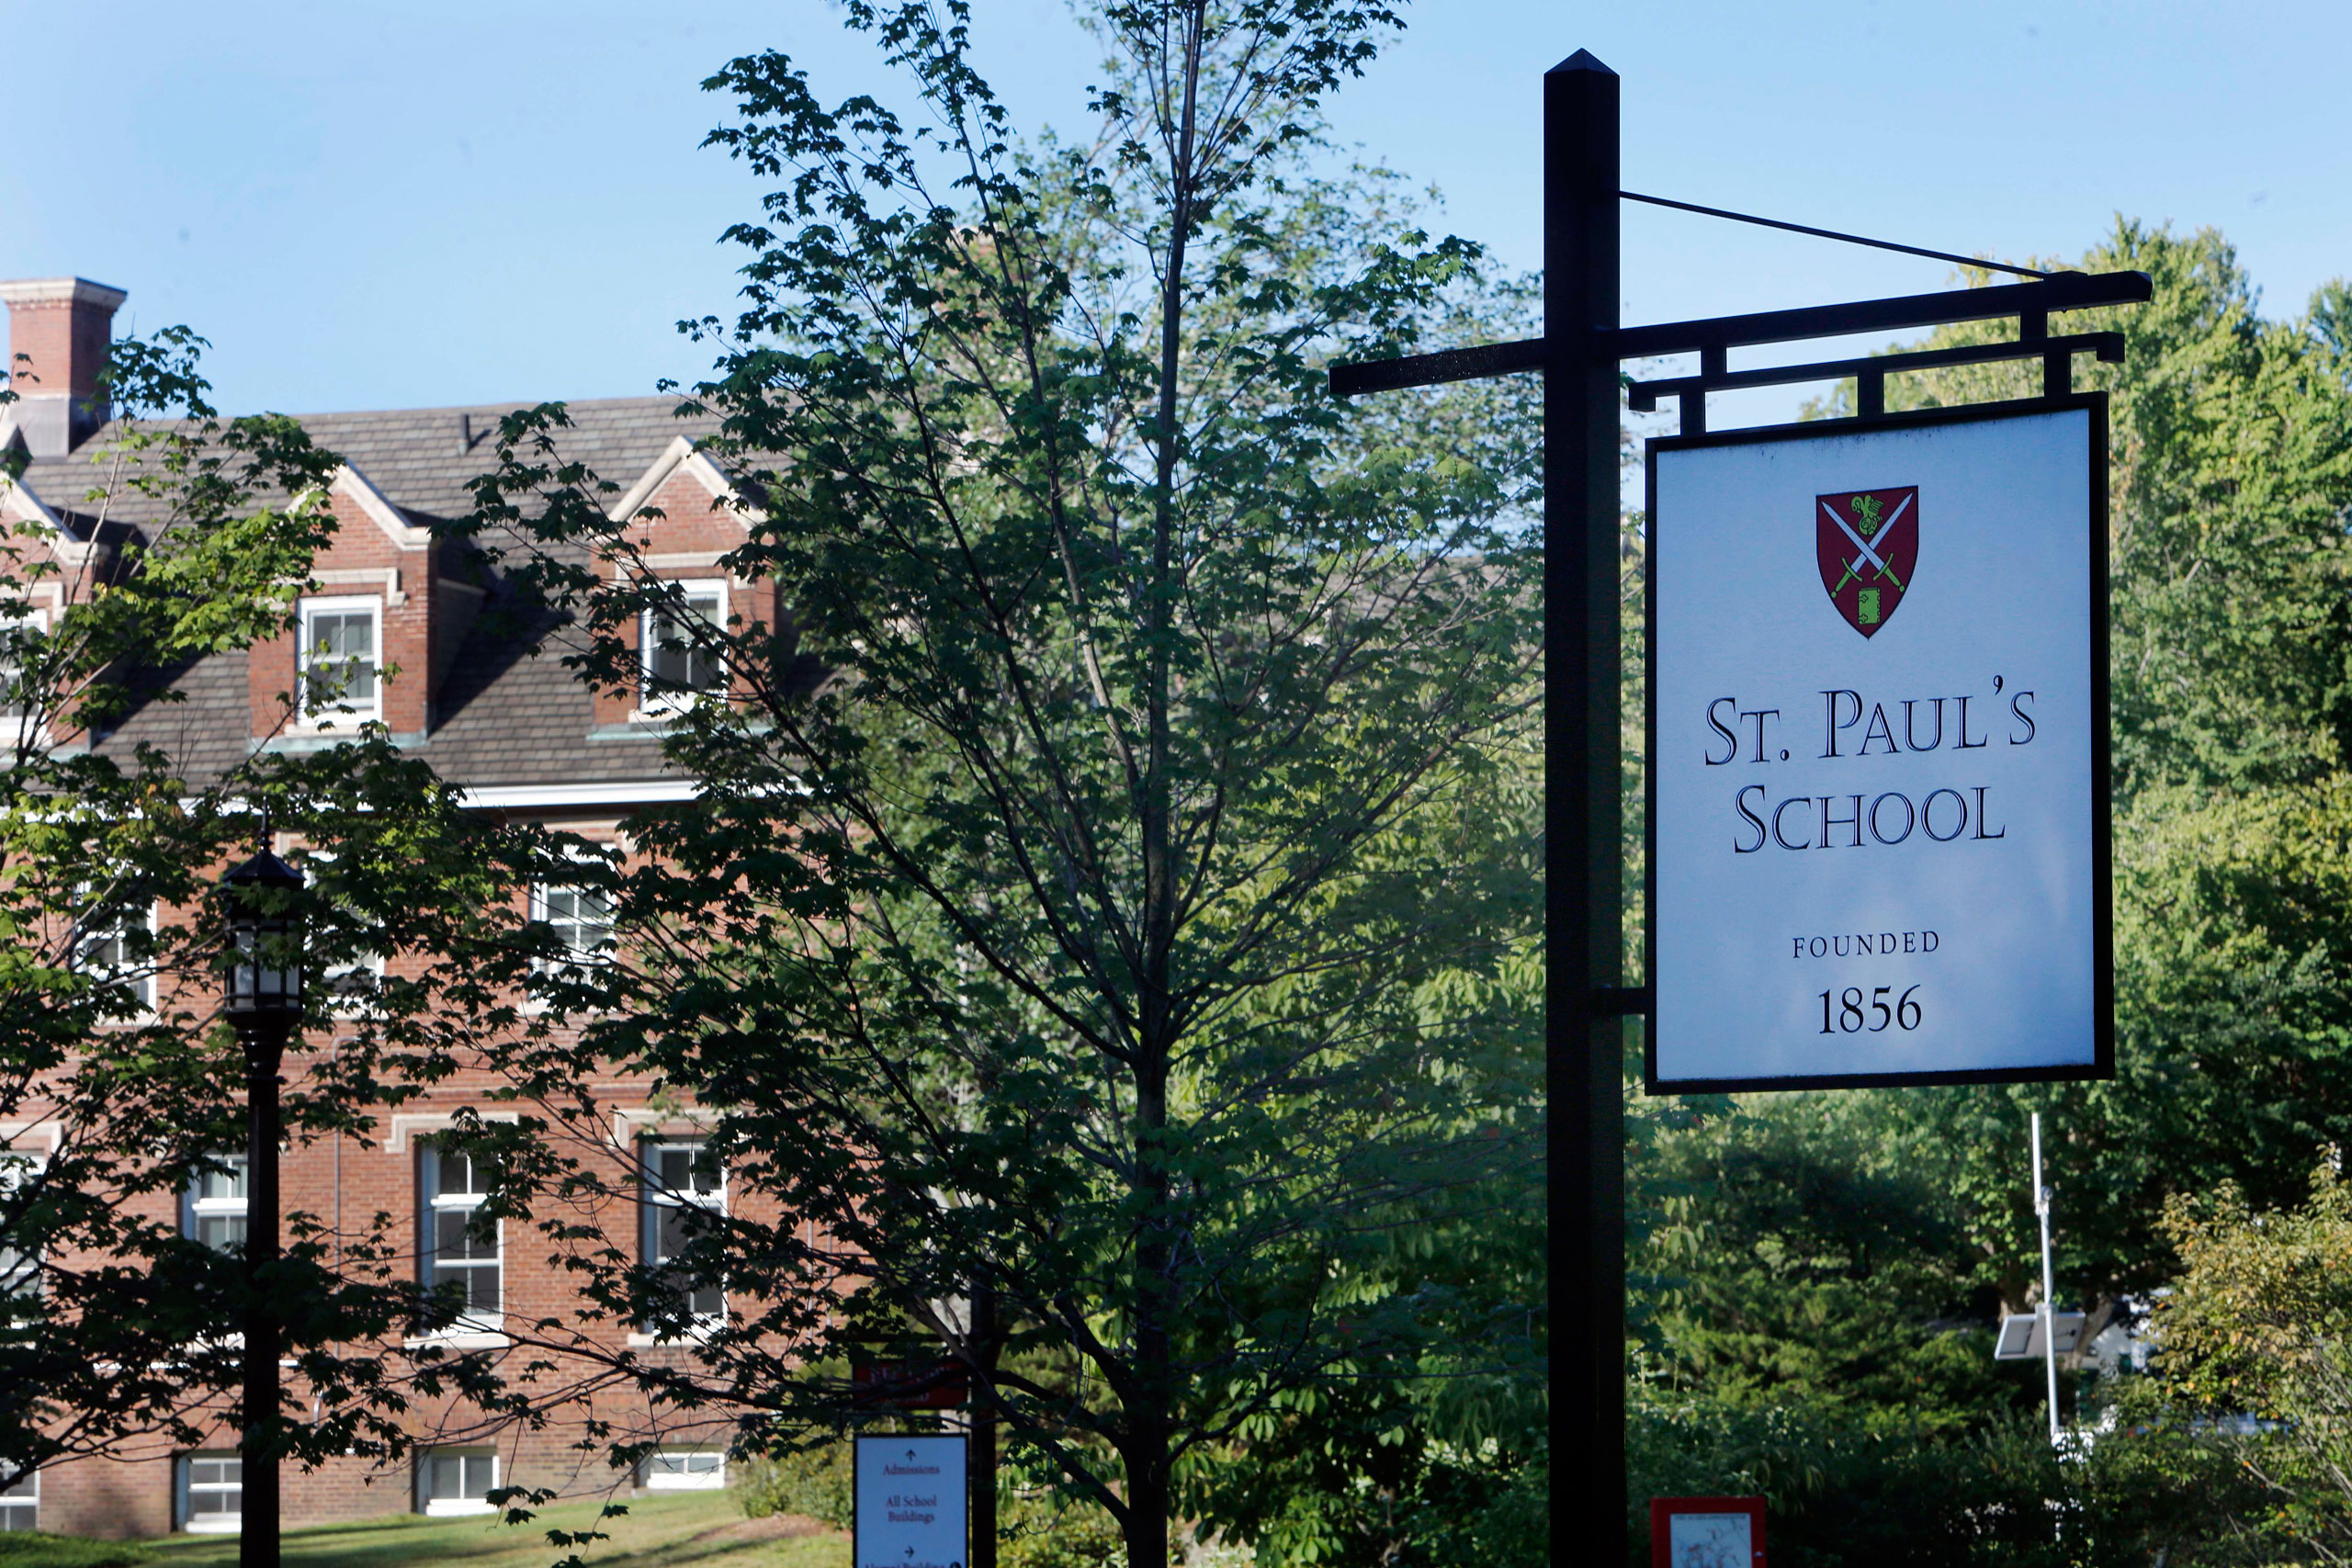 The entrance to the elite St. Paul’s School in Concord, N.H., is seen on Aug. 14, 2015. (Jim Cole—AP)